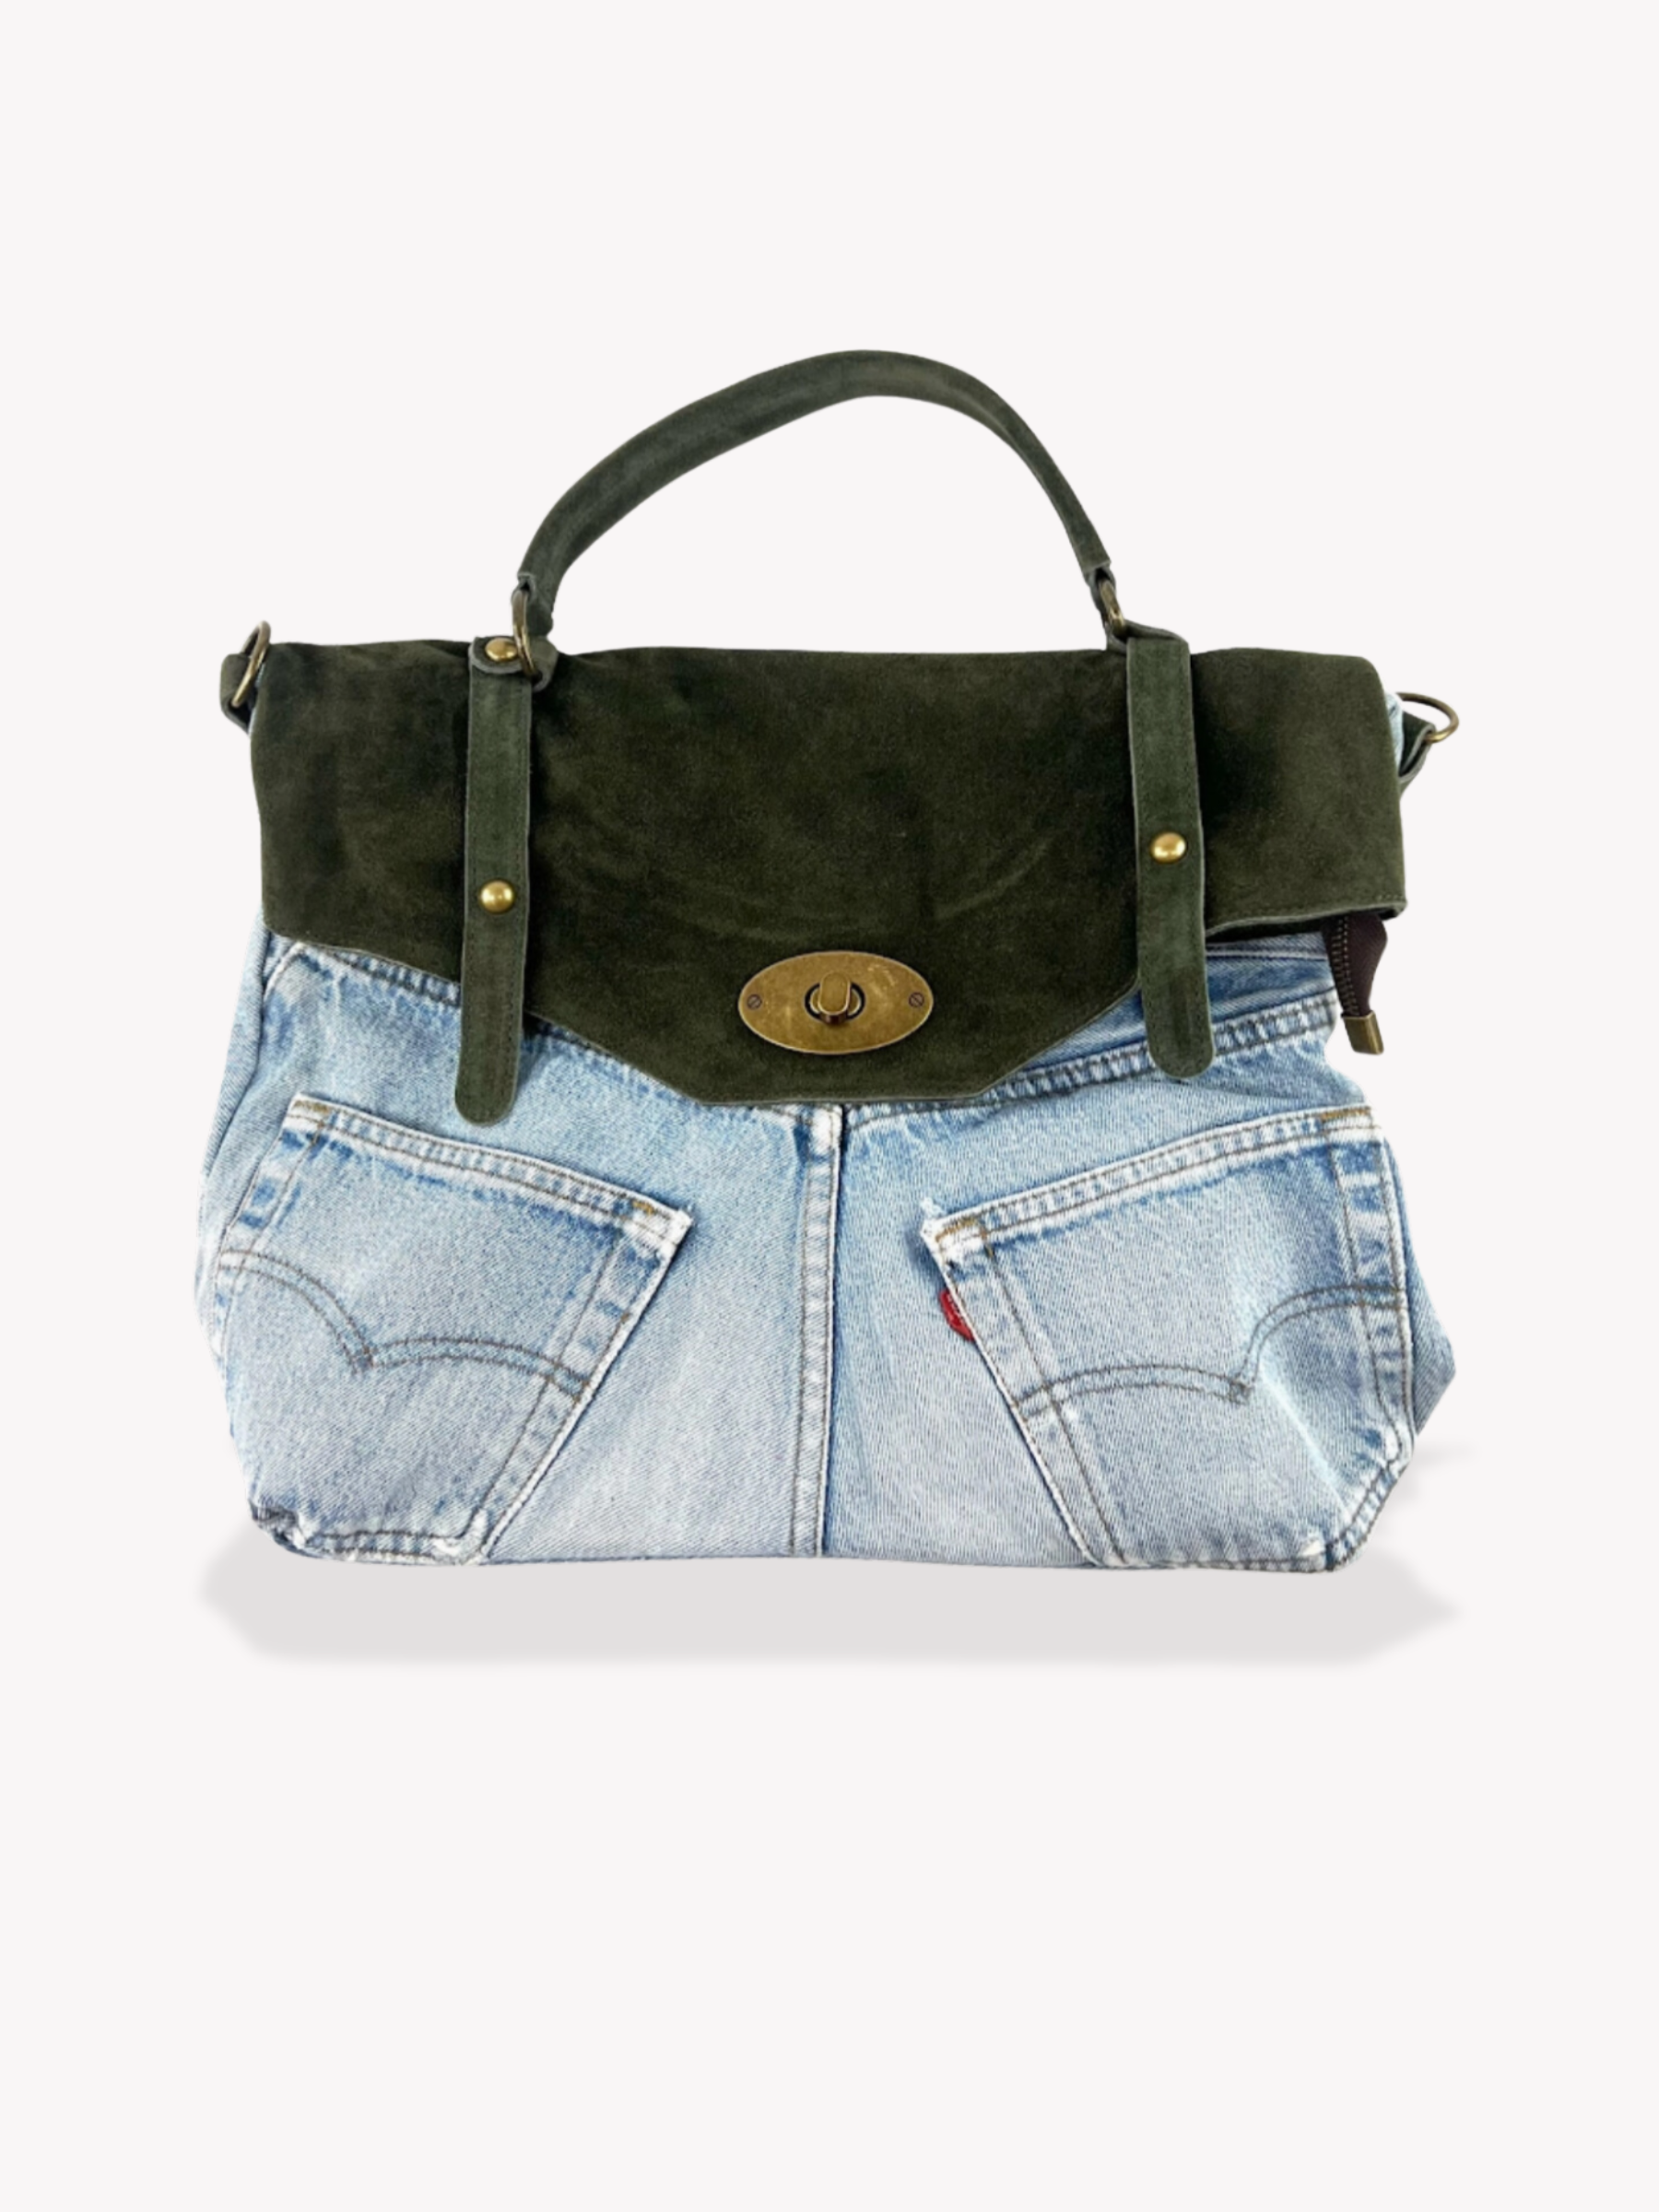 GOLDxTEAL gorgeous handcrafted denim and suede handbag.